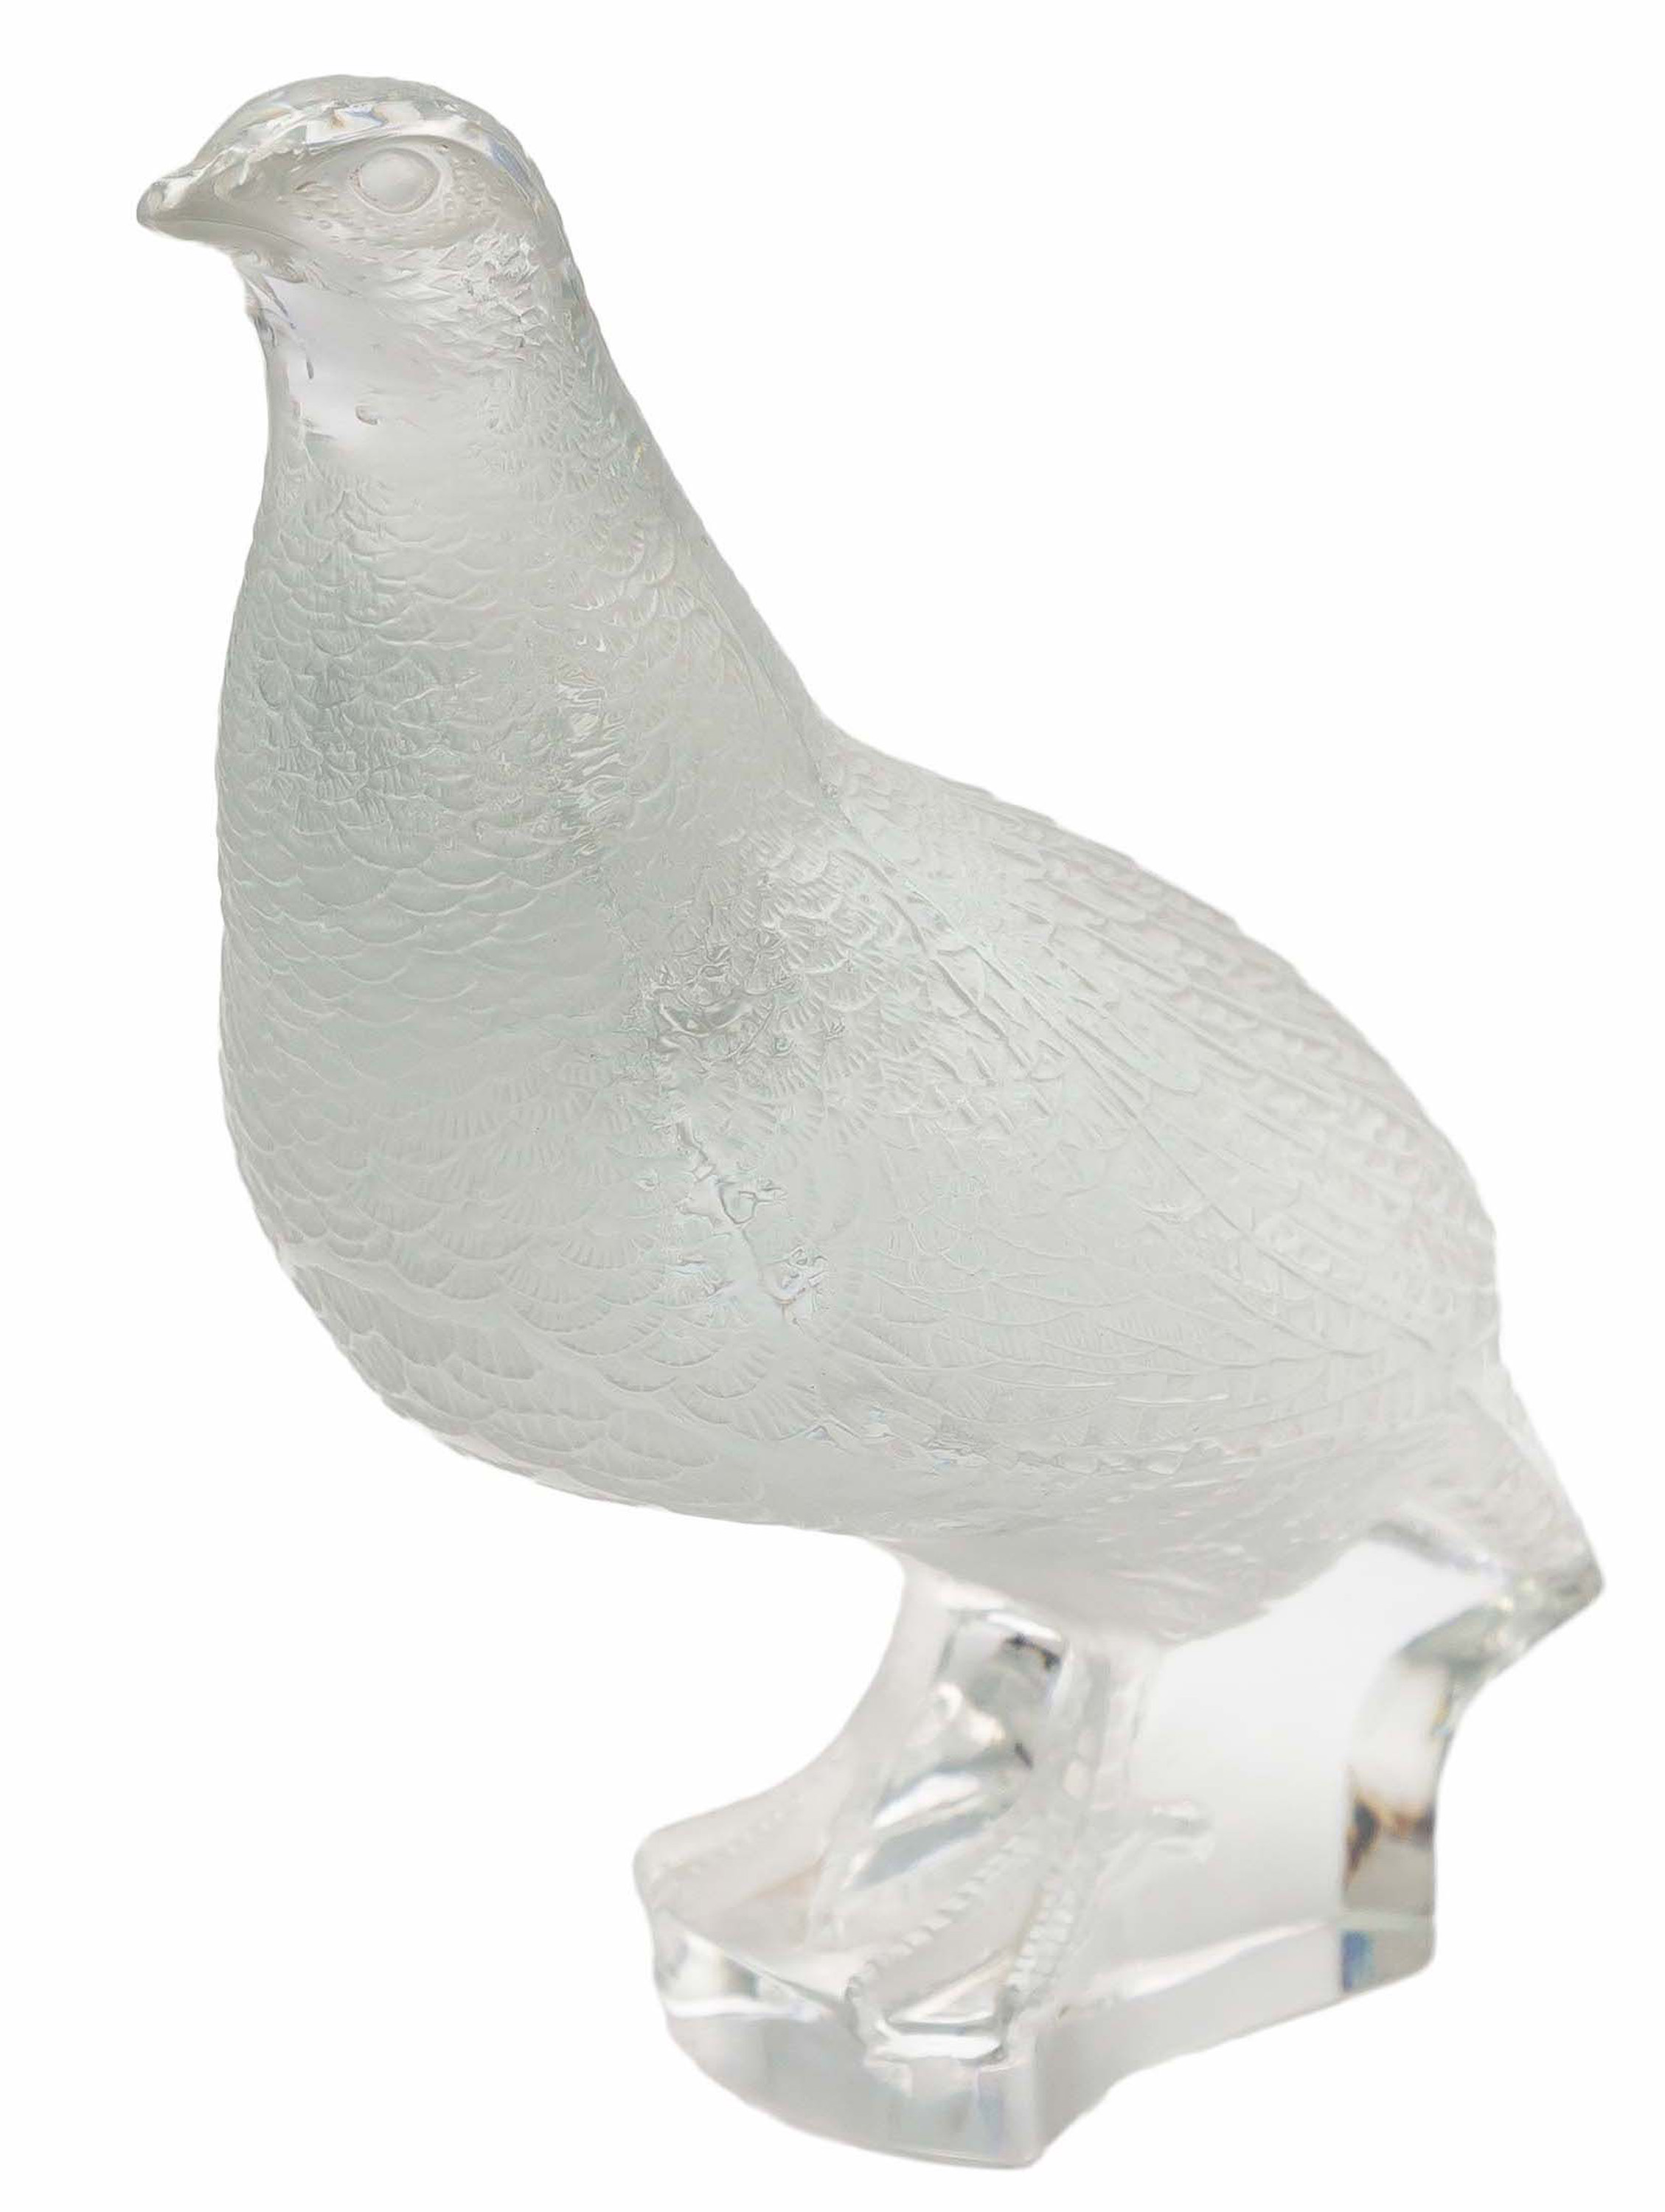 LALIQUE PHEASANT Made in France. Acid